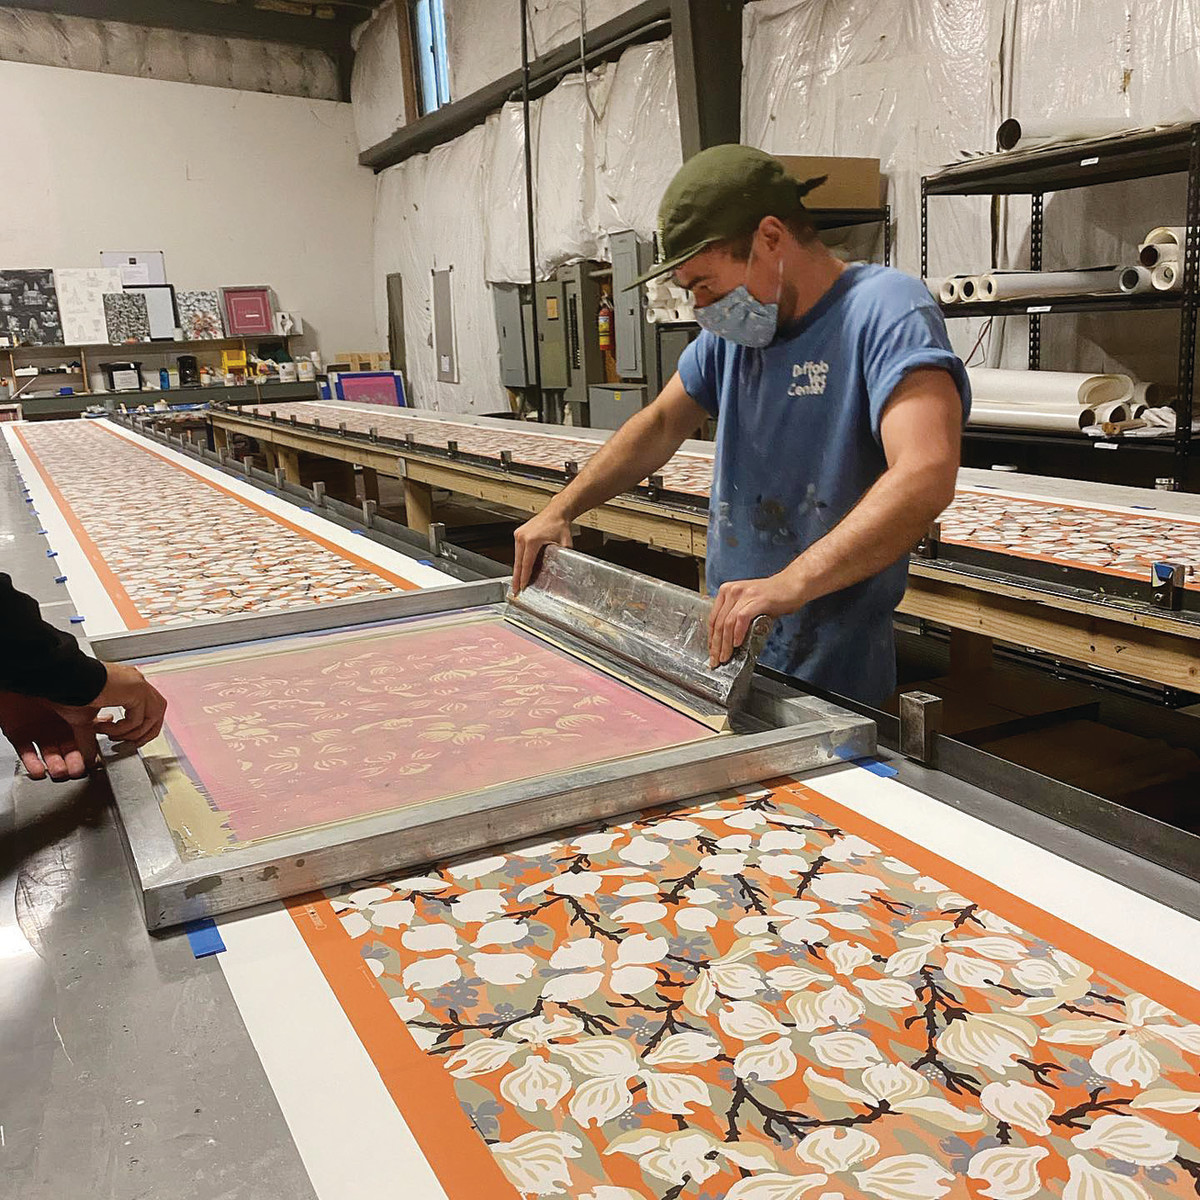 Silk screeners print color layer by layer to produce designs like “Dogwood,” which dates to the early 1920s.